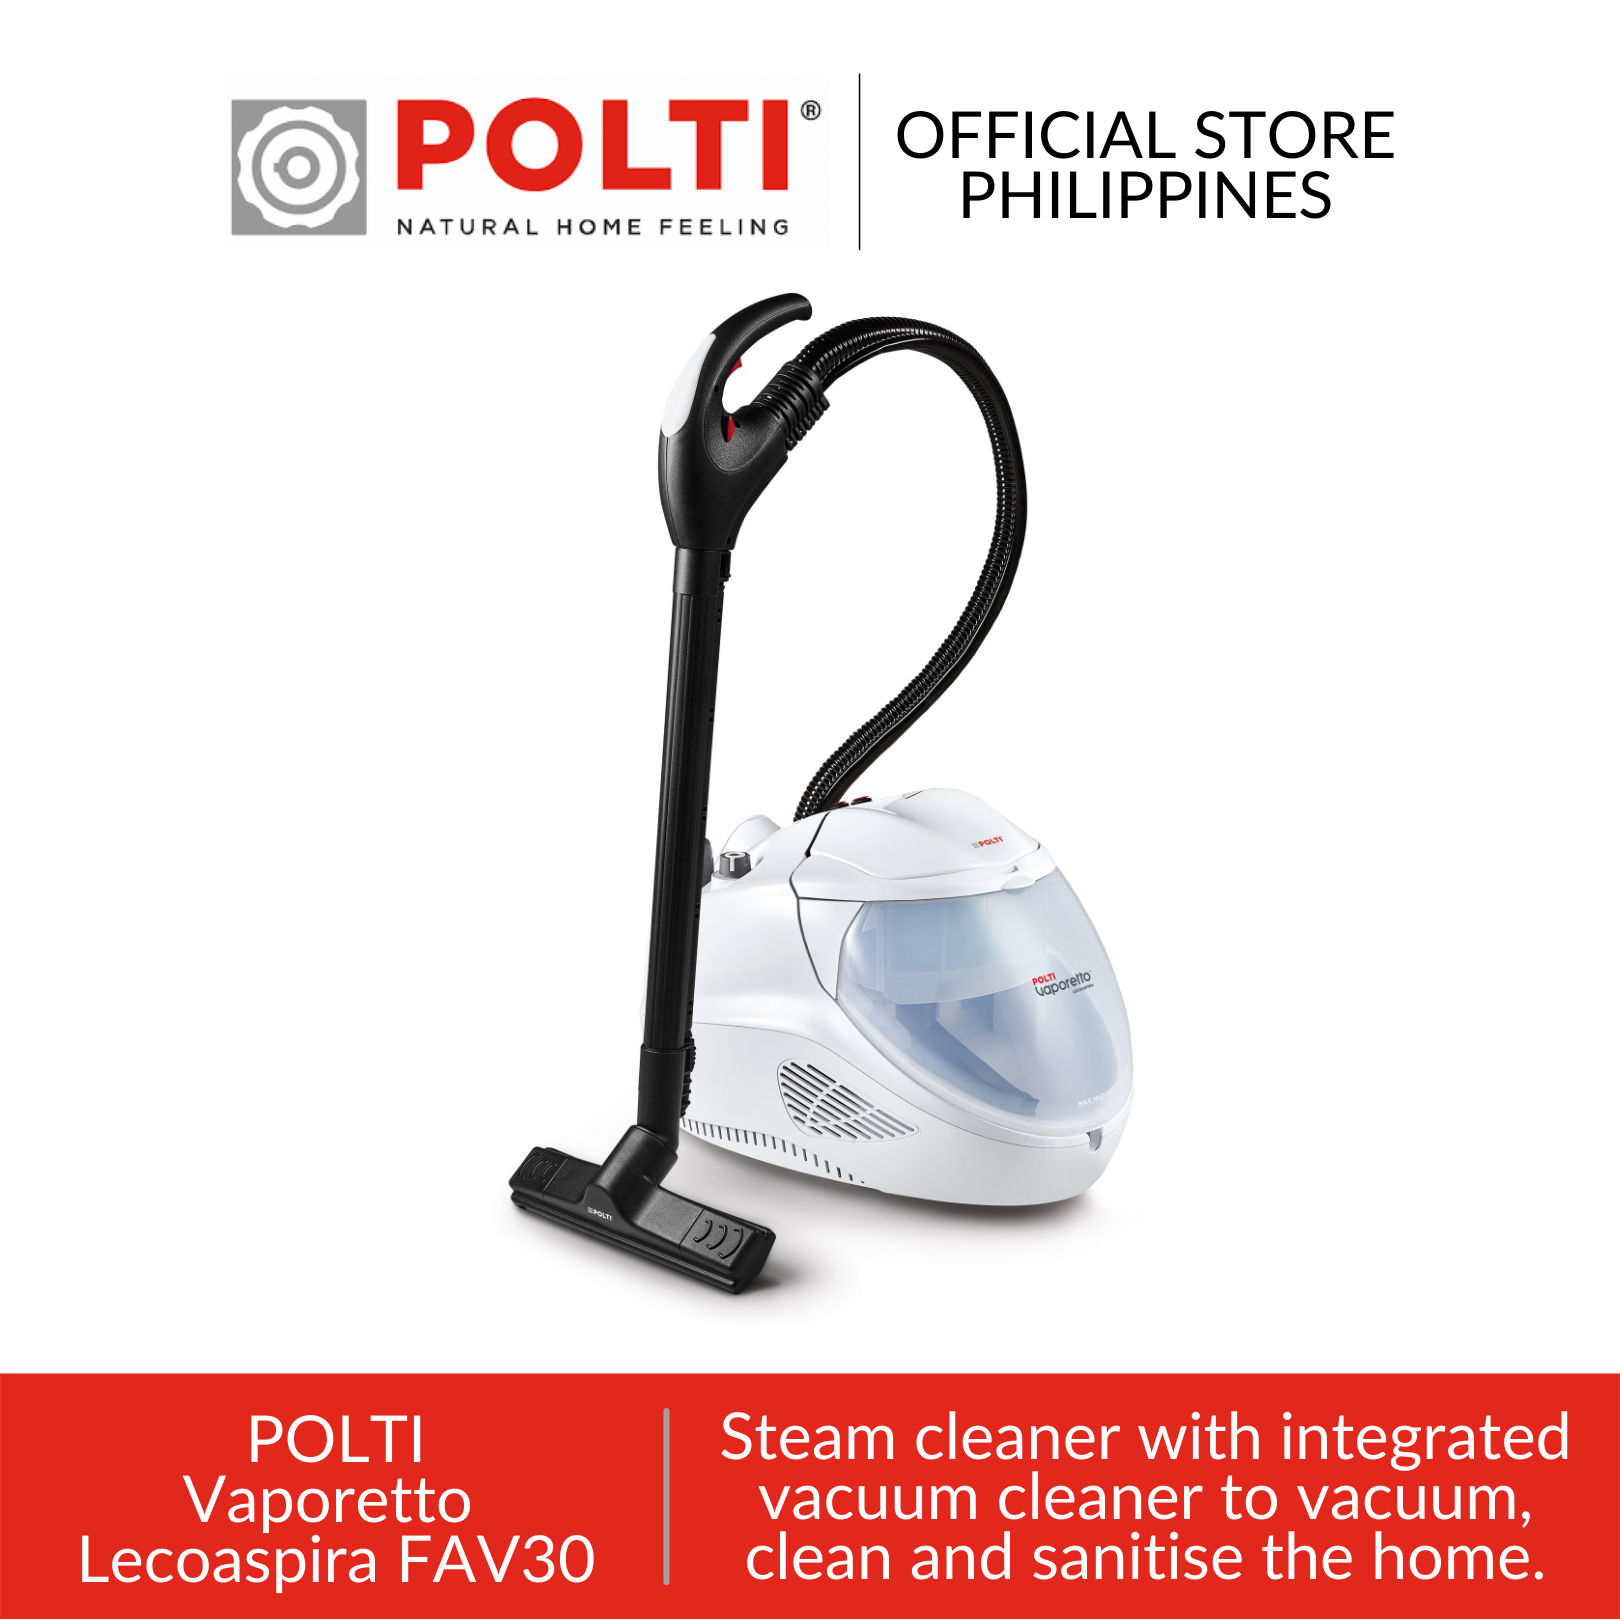 Introducing the POLTI Vaporetto 3 Clean, A 3-in-1 home cleaner: vacuum and  sanitize all floors and washable surfaces with the vacuum steam mop., By POLTI Philippines